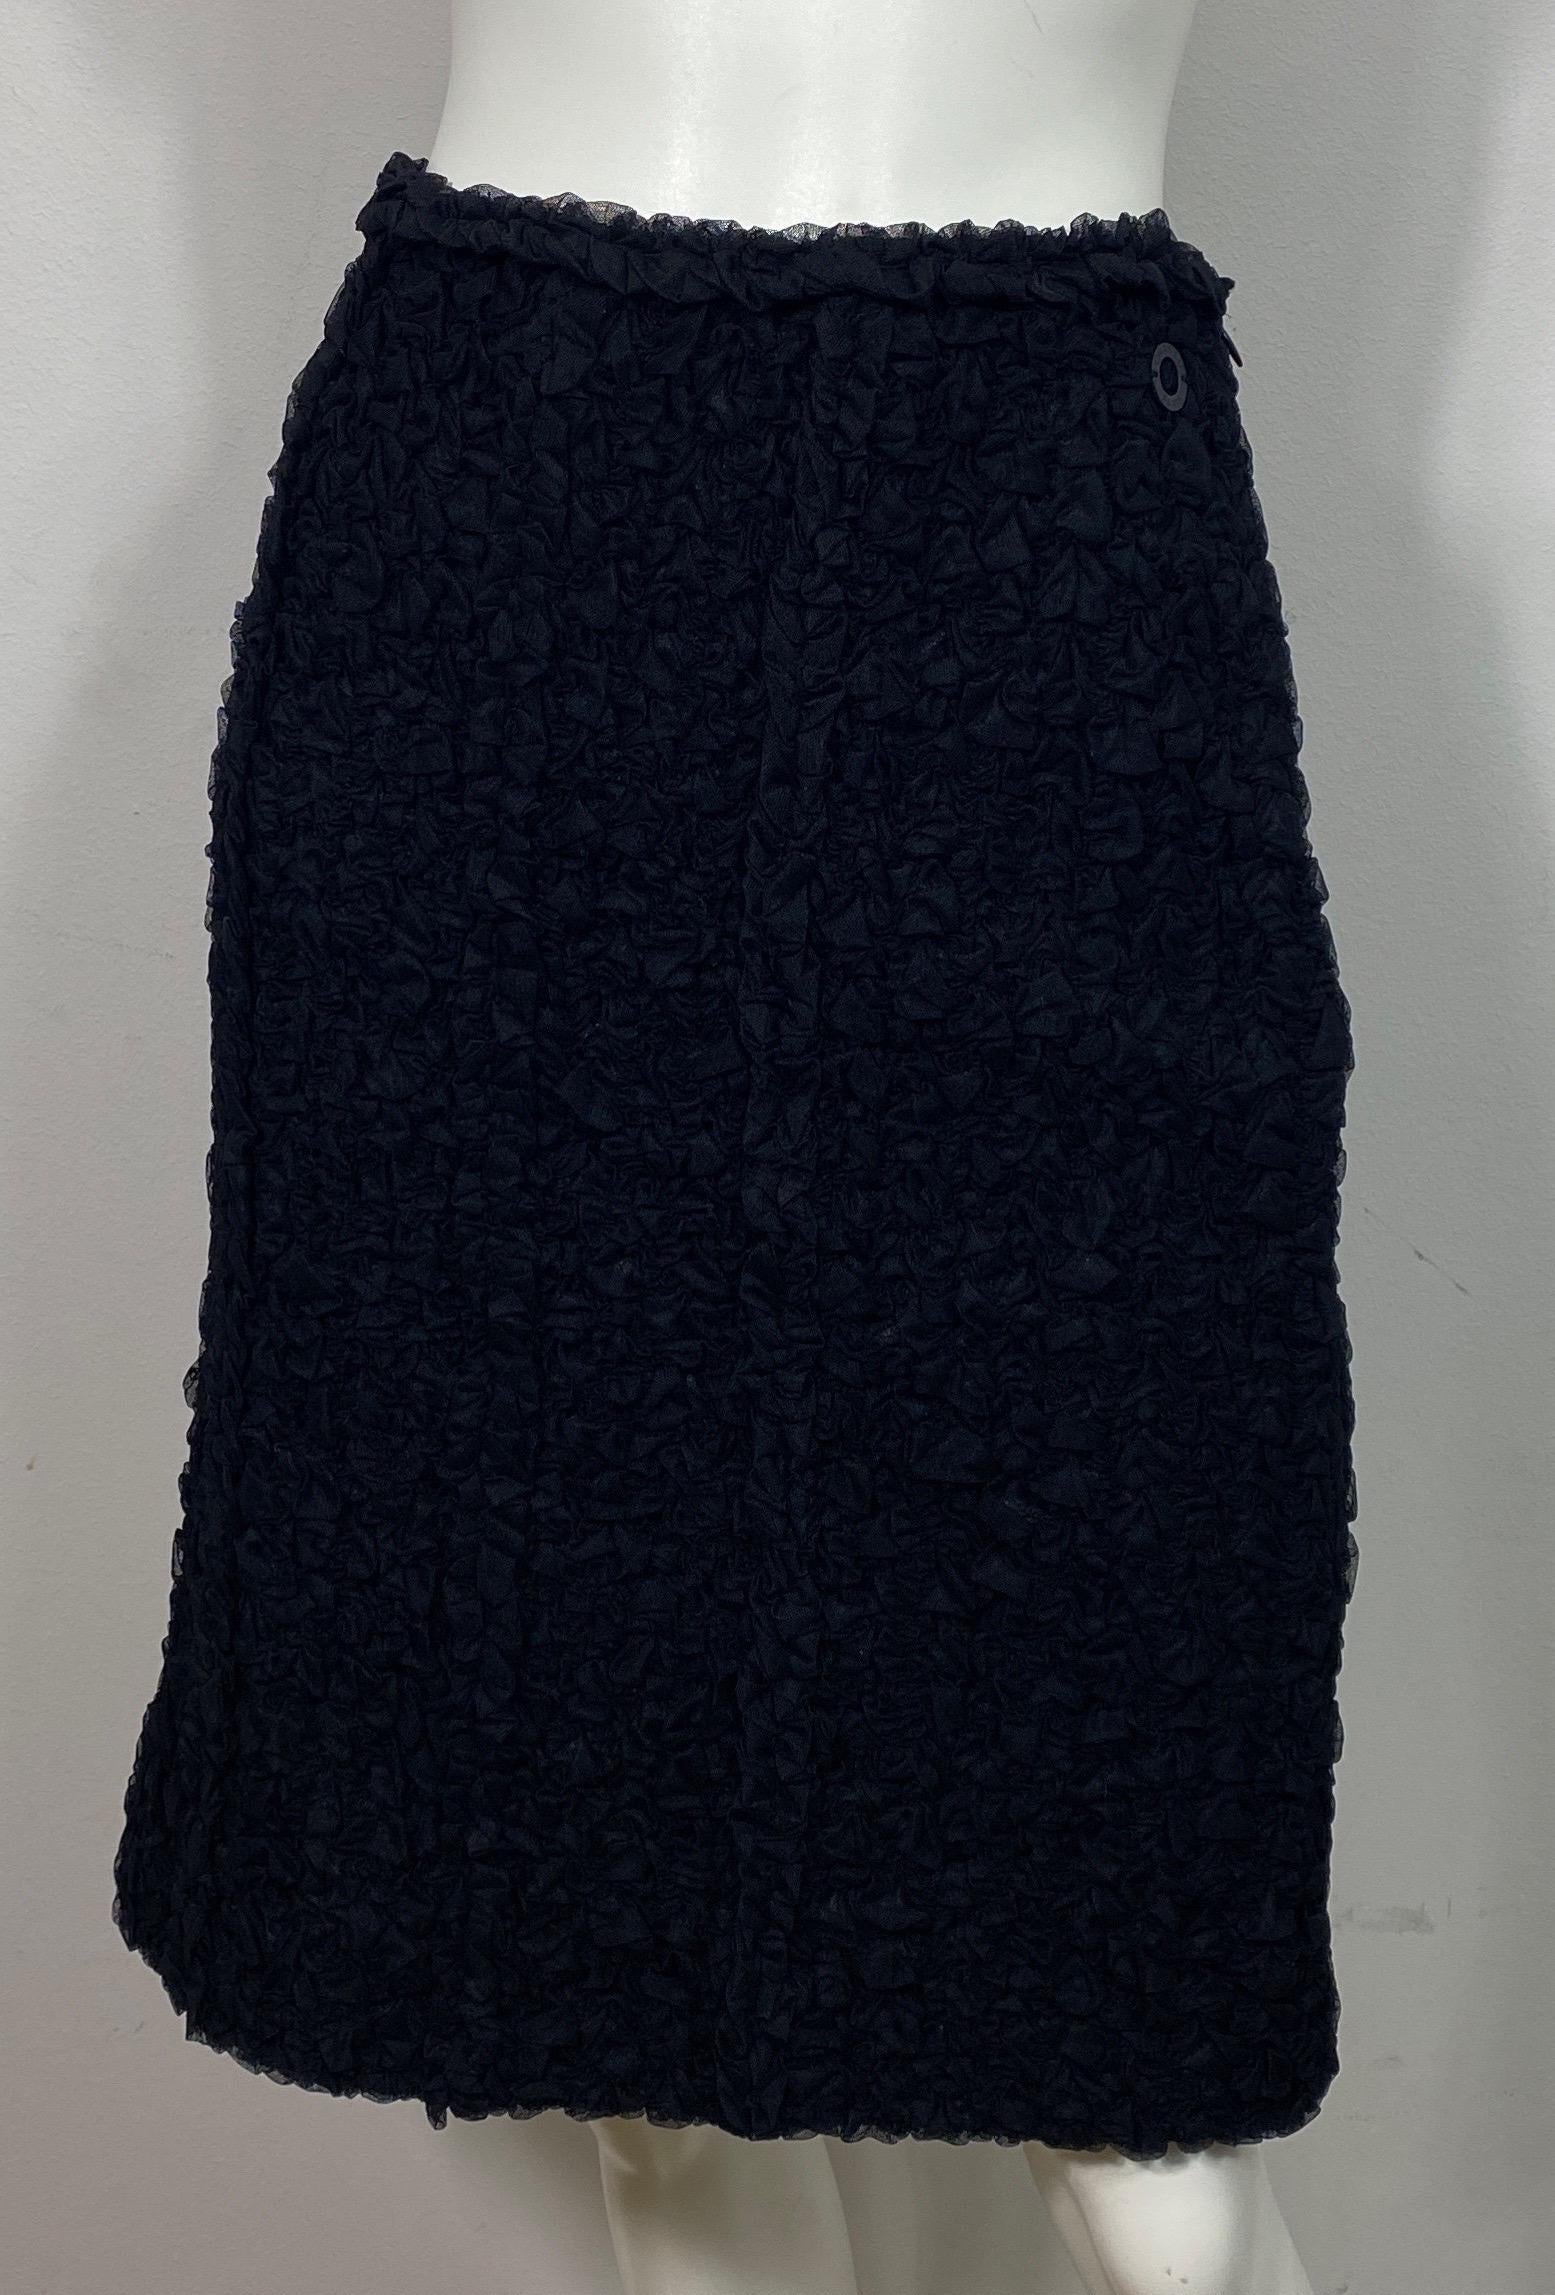 Women's Chanel 2000 Spring Transitions Collection Black Ruched Mesh A LineSkirt-Size 42 For Sale